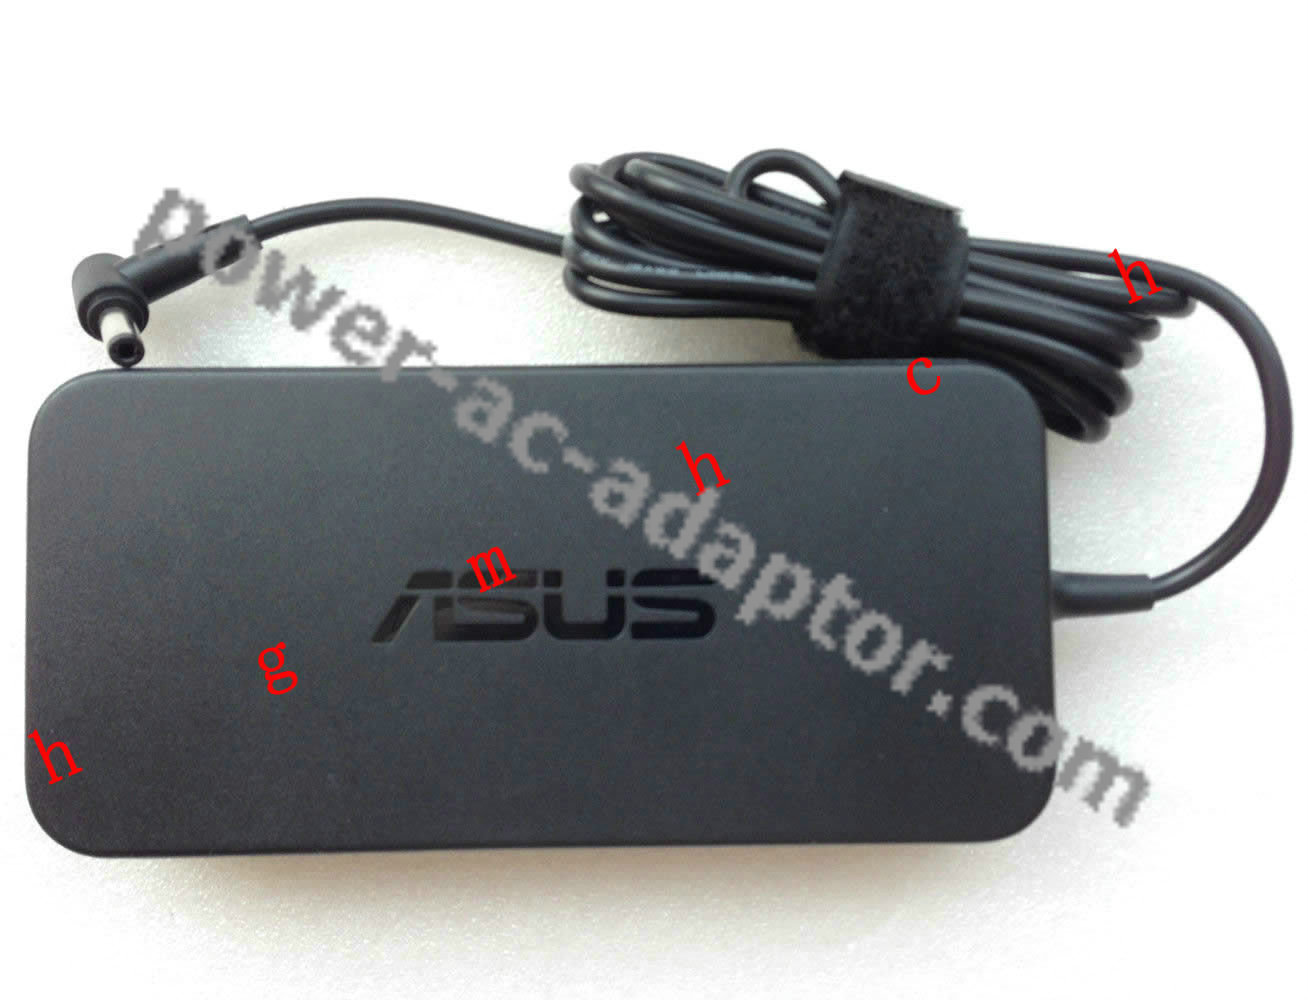 Genuine OEM Asus 120W Slim G60Vx T9600 Gaming AC Adapter for - Click Image to Close